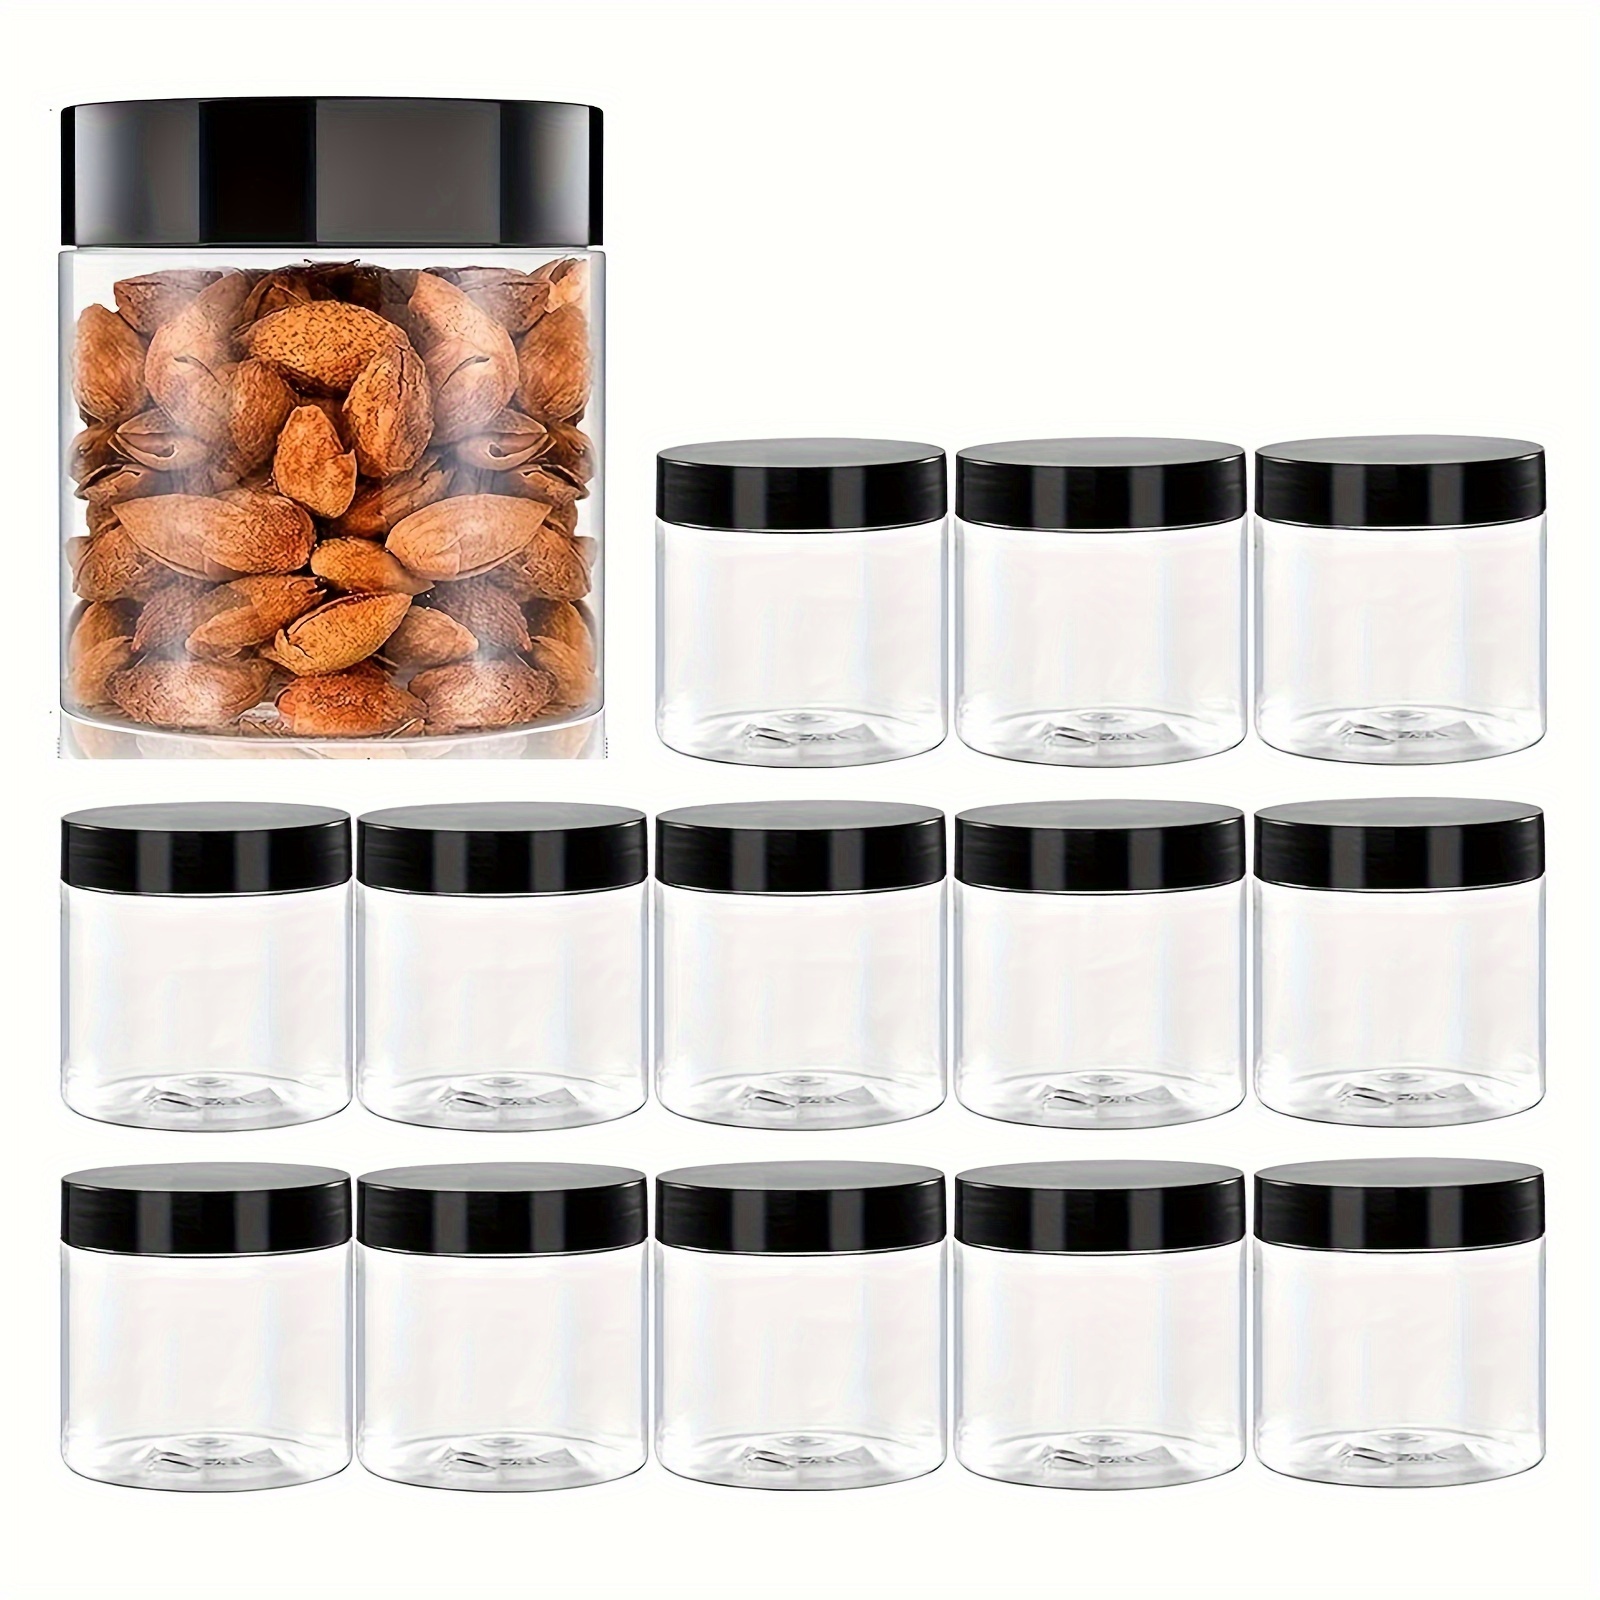 

14pcs Bpa-free 4.7oz Plastic Jars With Lids And Labels, Clear Round Cosmetic Containers For Lotion, Creams, Ointments, Body Butter, Travel Storage